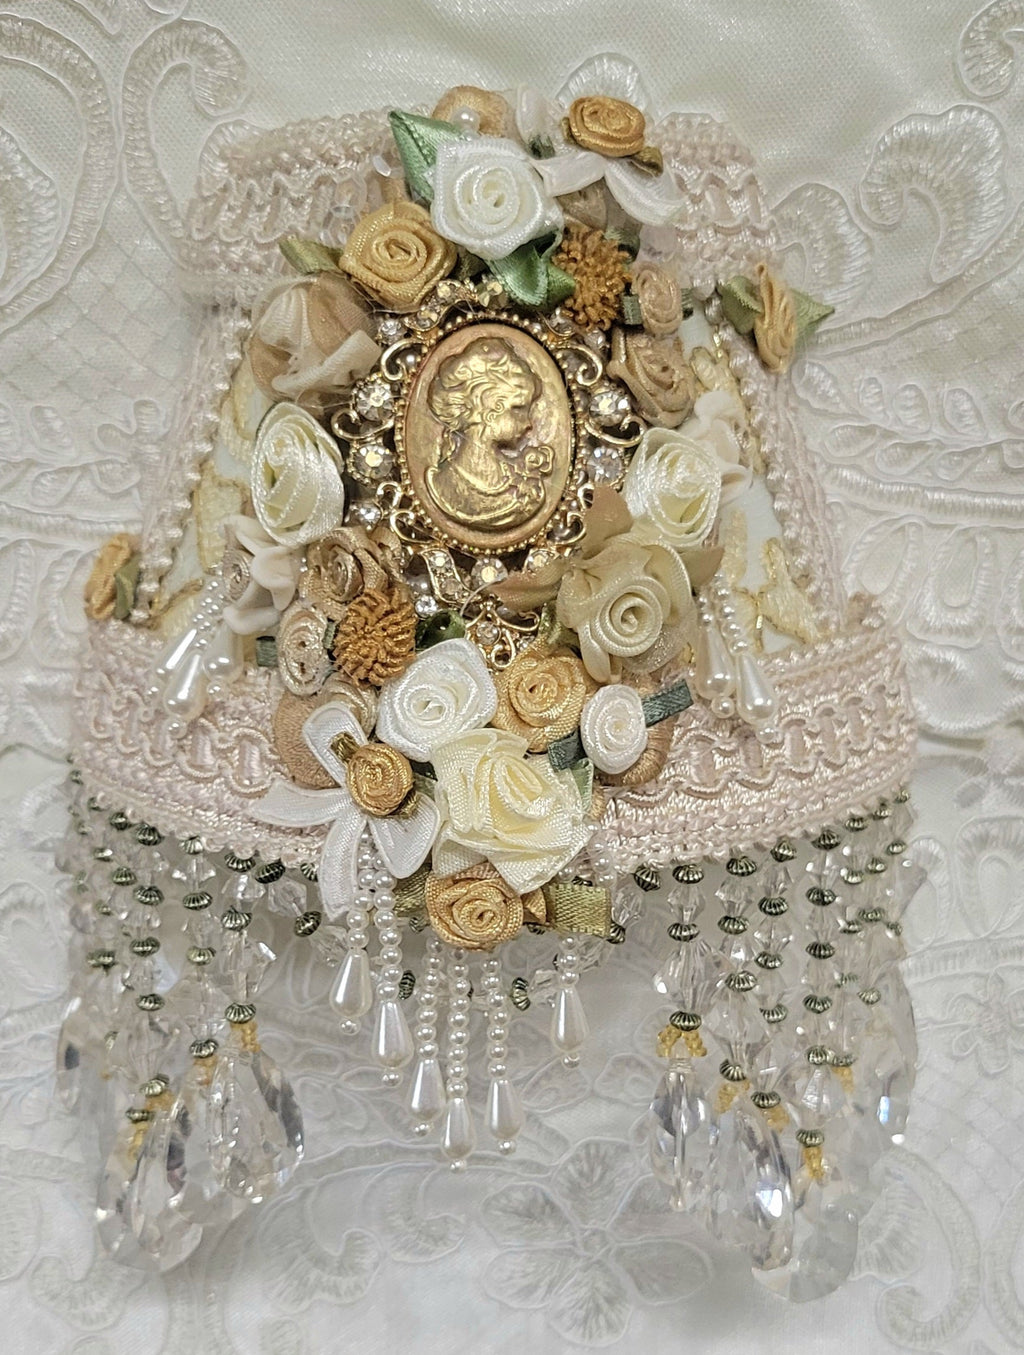 Ivory wih Gold Victorian Cameo Lace and Hand Beaded Fringe Nightlight (night light) - One of a Kind!-Roses And Teacups